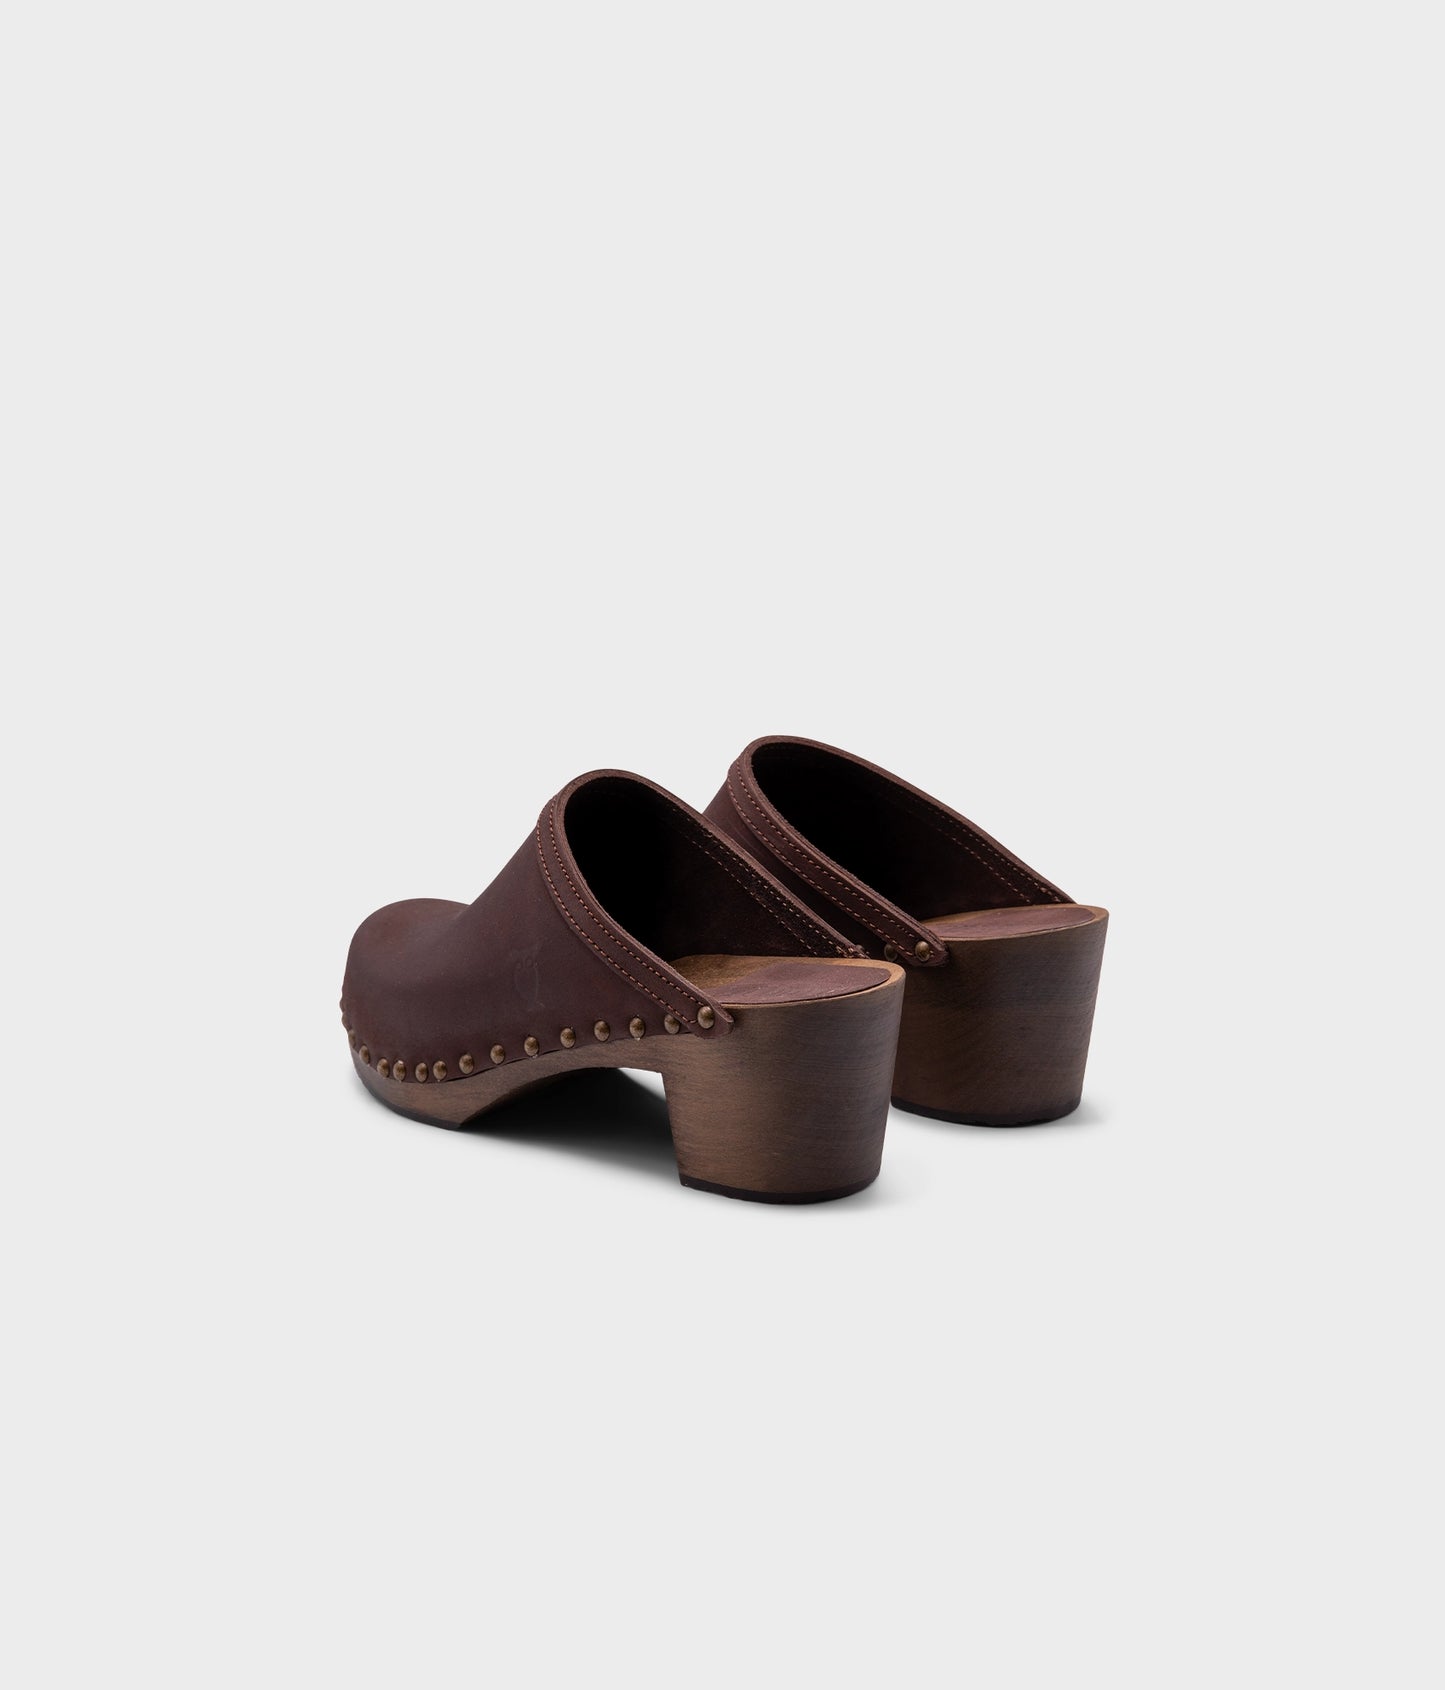 high heeled clog mules in dark brown nubuck leather stapled on a dark wooden base with brass gold studs